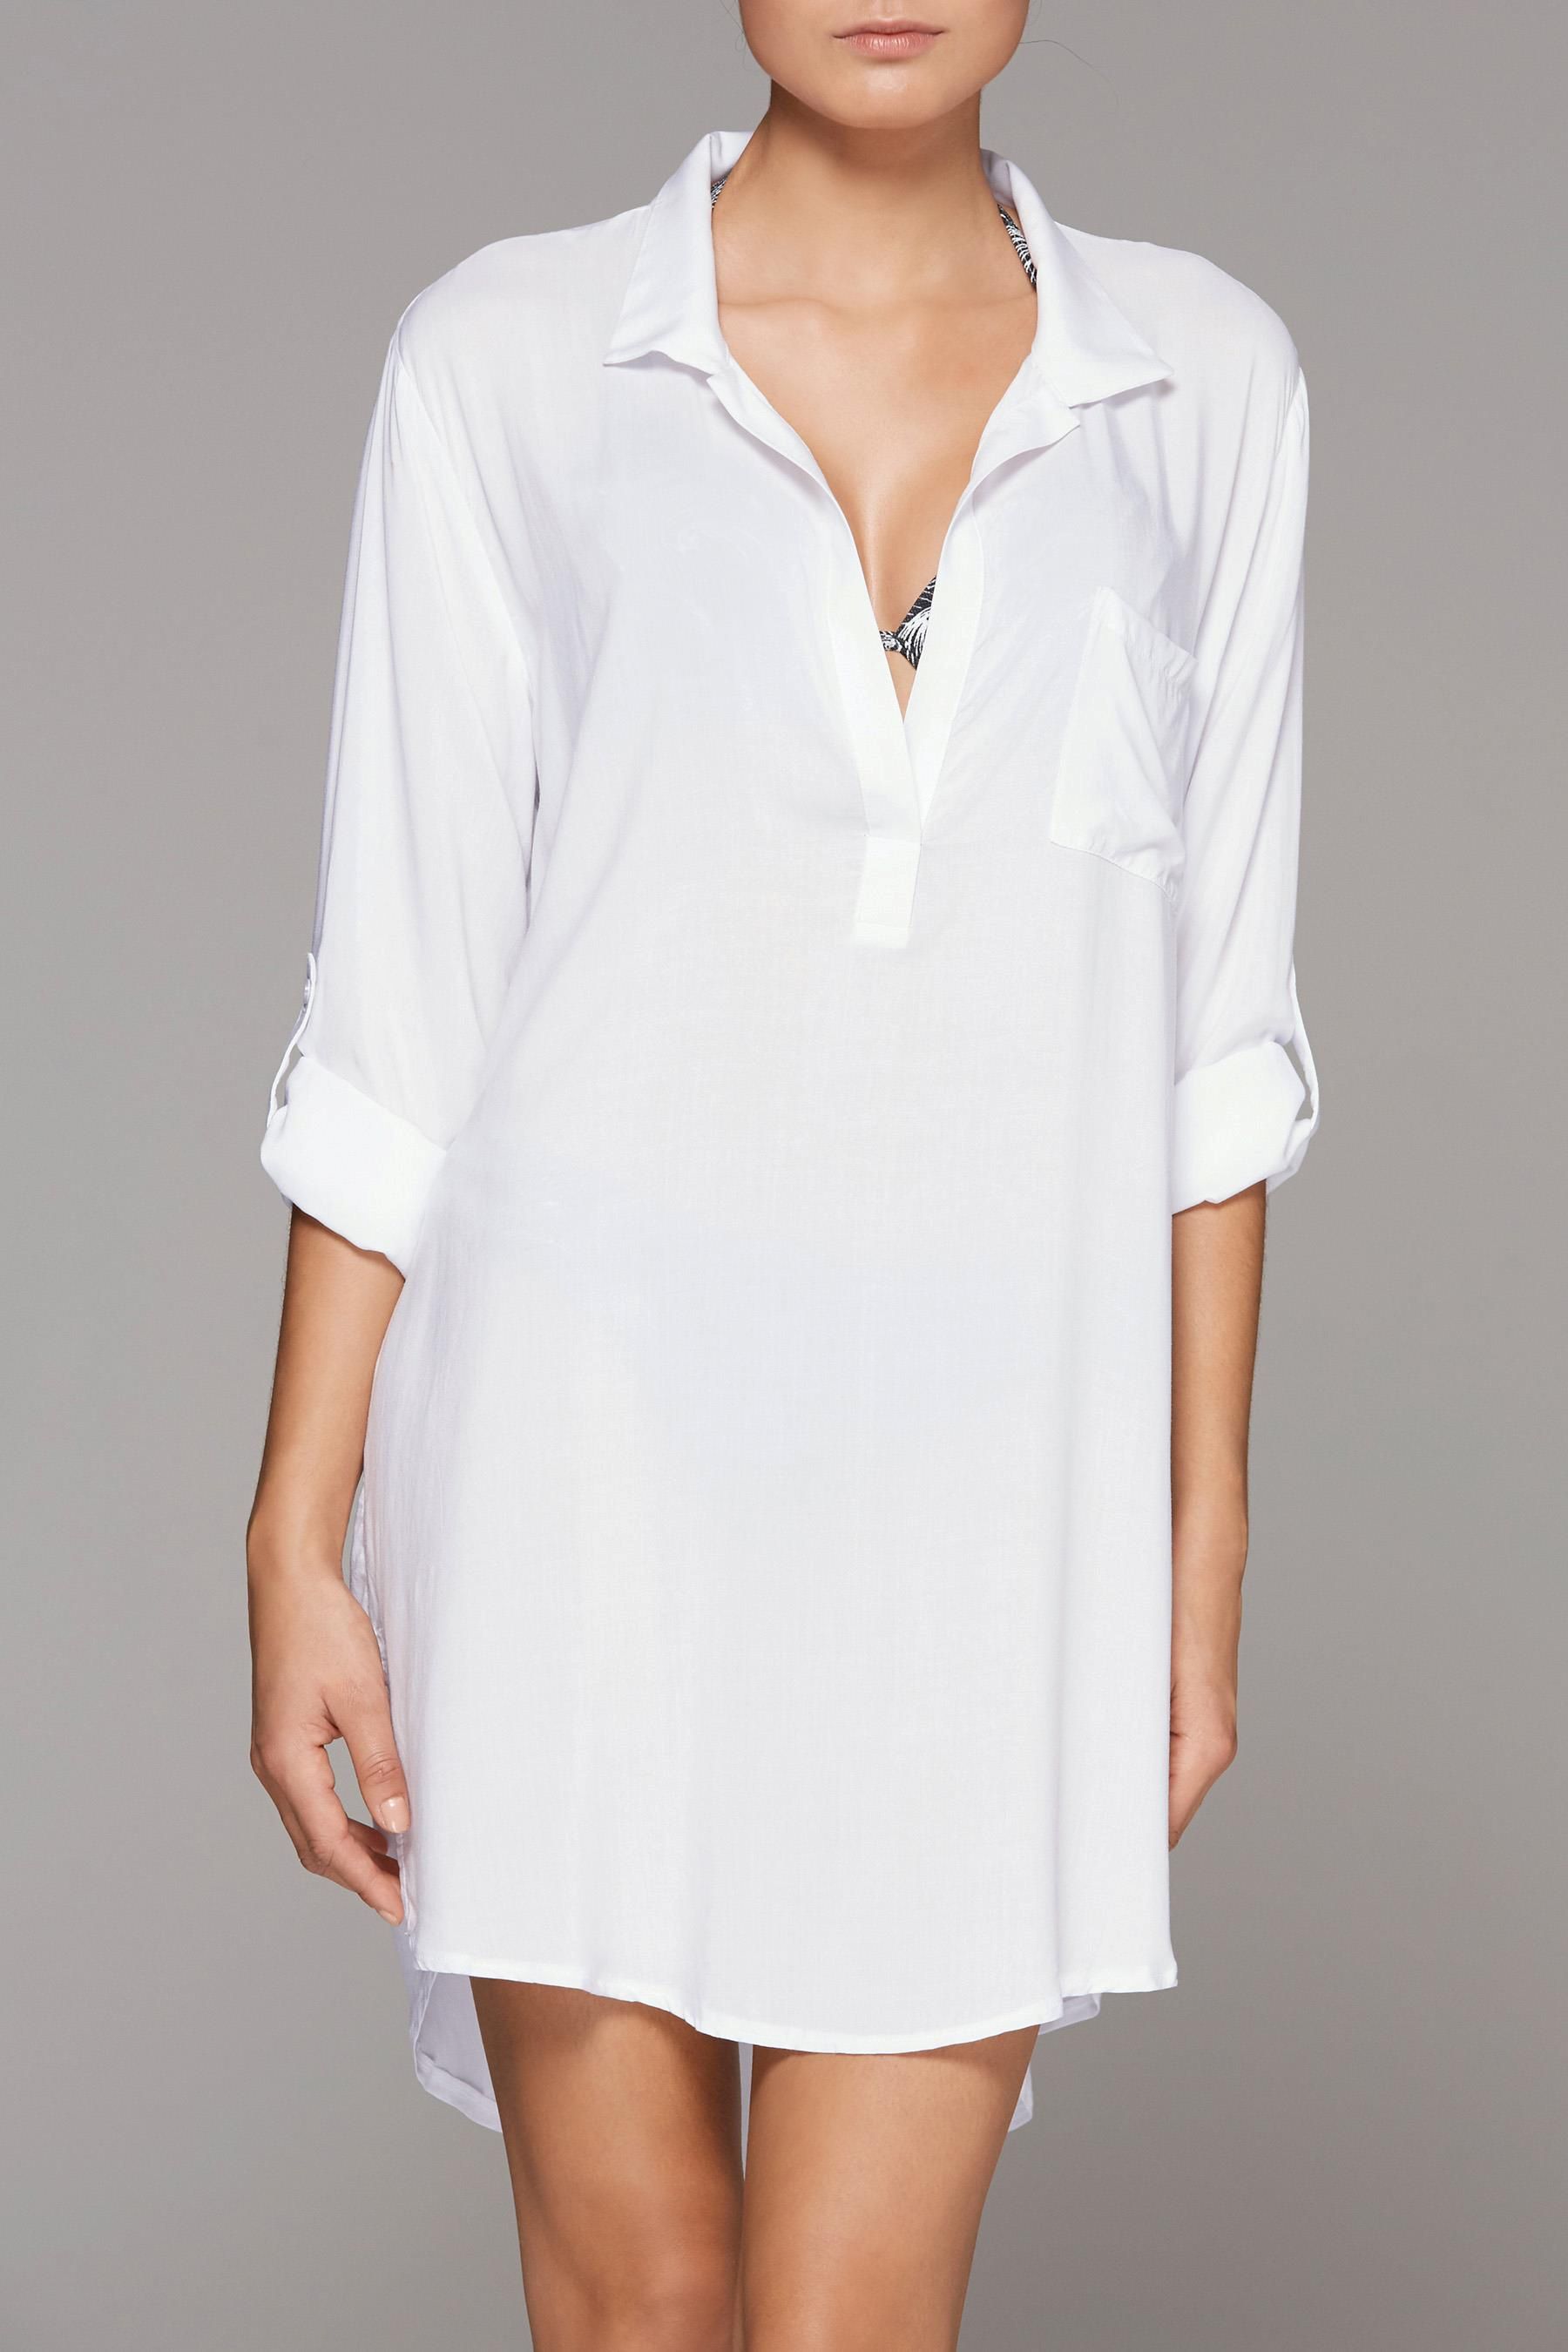 F4585 Sexy Translucent Deep V Neck White Swimsuit Cover Up Dress with Pocket